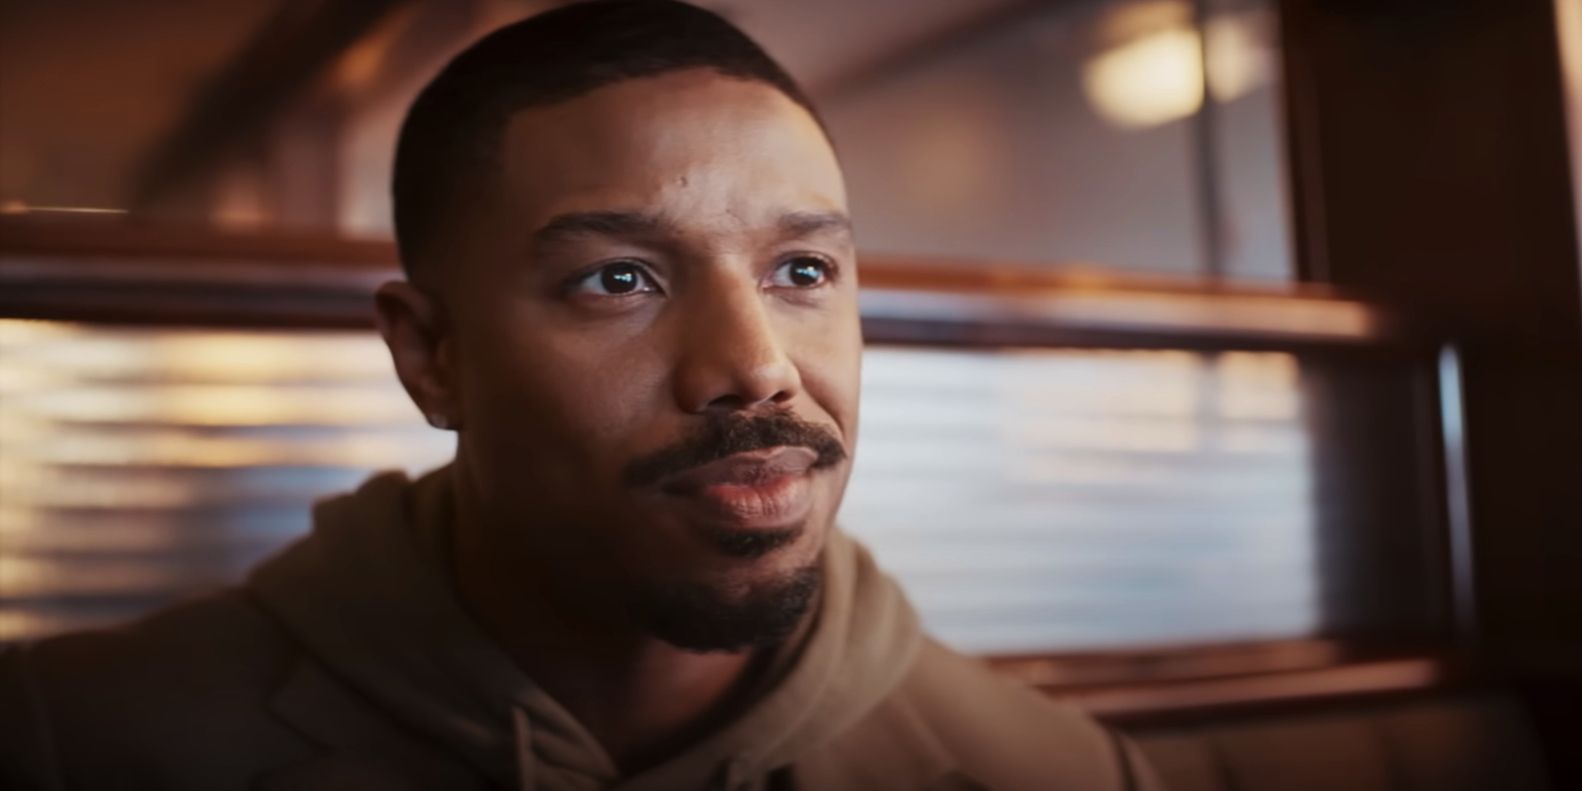 Michael B Jordan as Adonis Creed sitting in booth smiling slightly in Creed 3